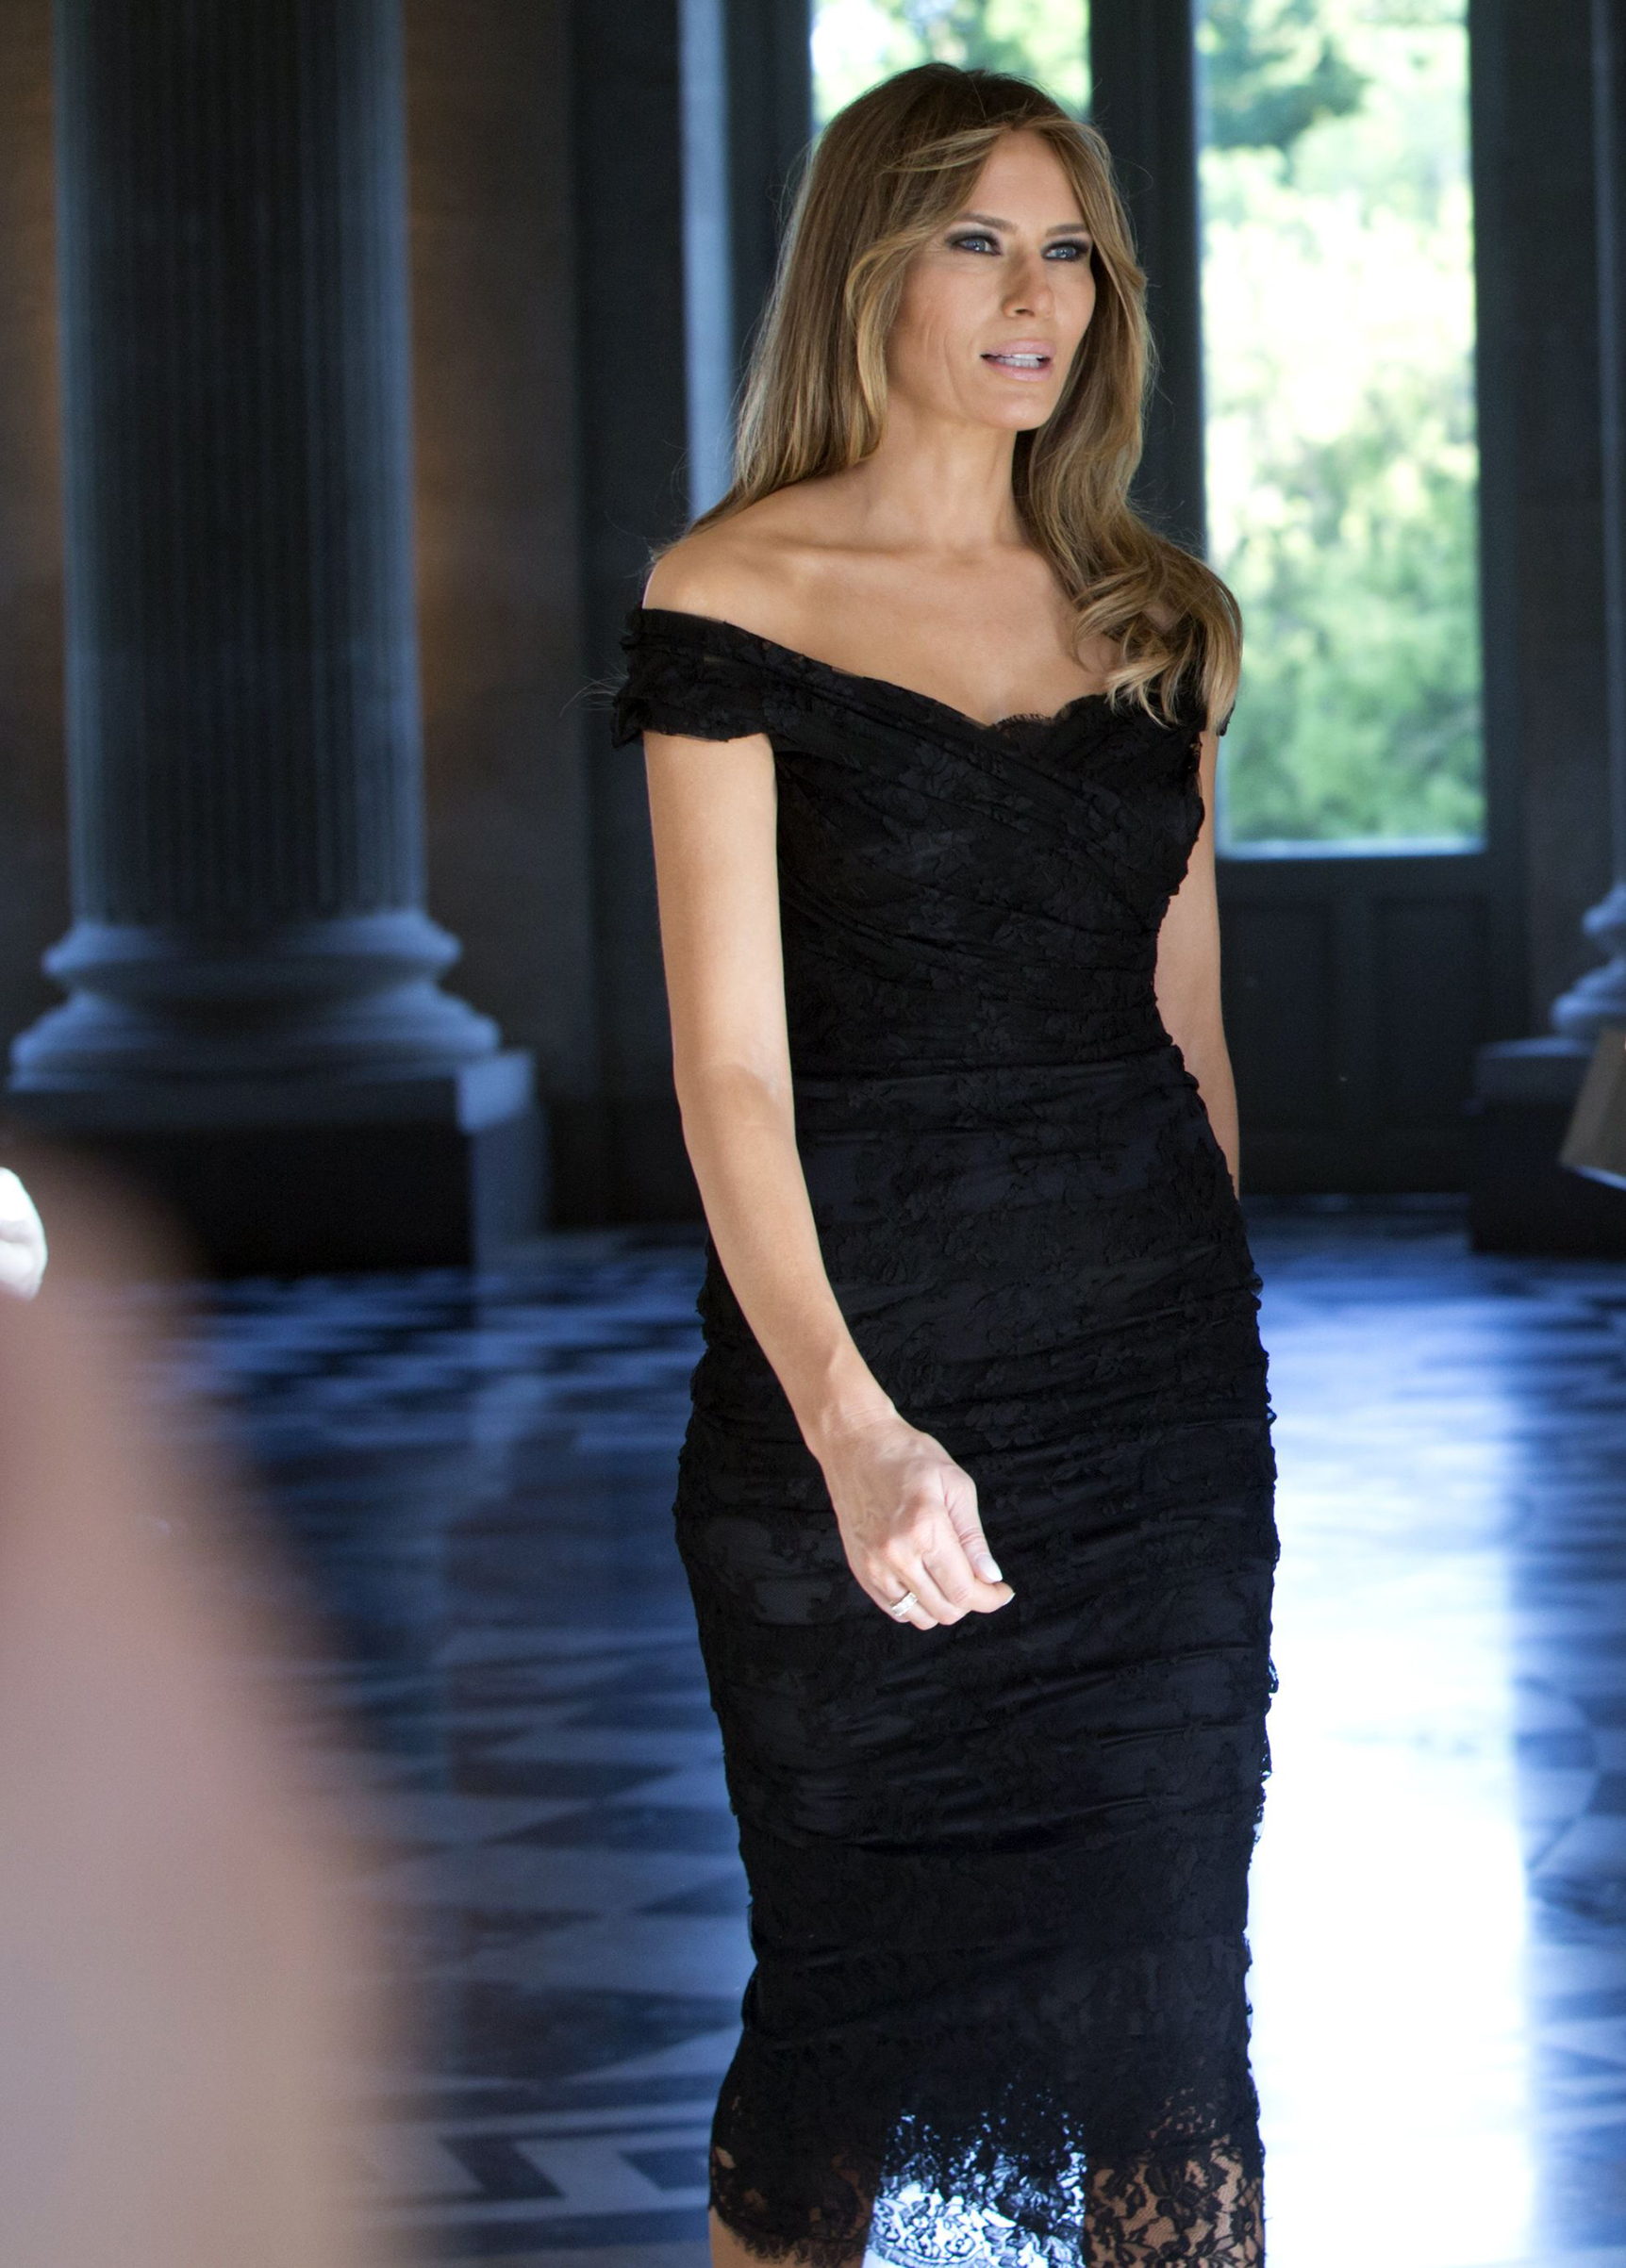 First lady Melania Trump wearing a Dolce & Gabbana black lace dress, walks prior to a group photo during the spouse and partner program at the Royal Palace of Laeken, near Brussels, 25, May 2017.